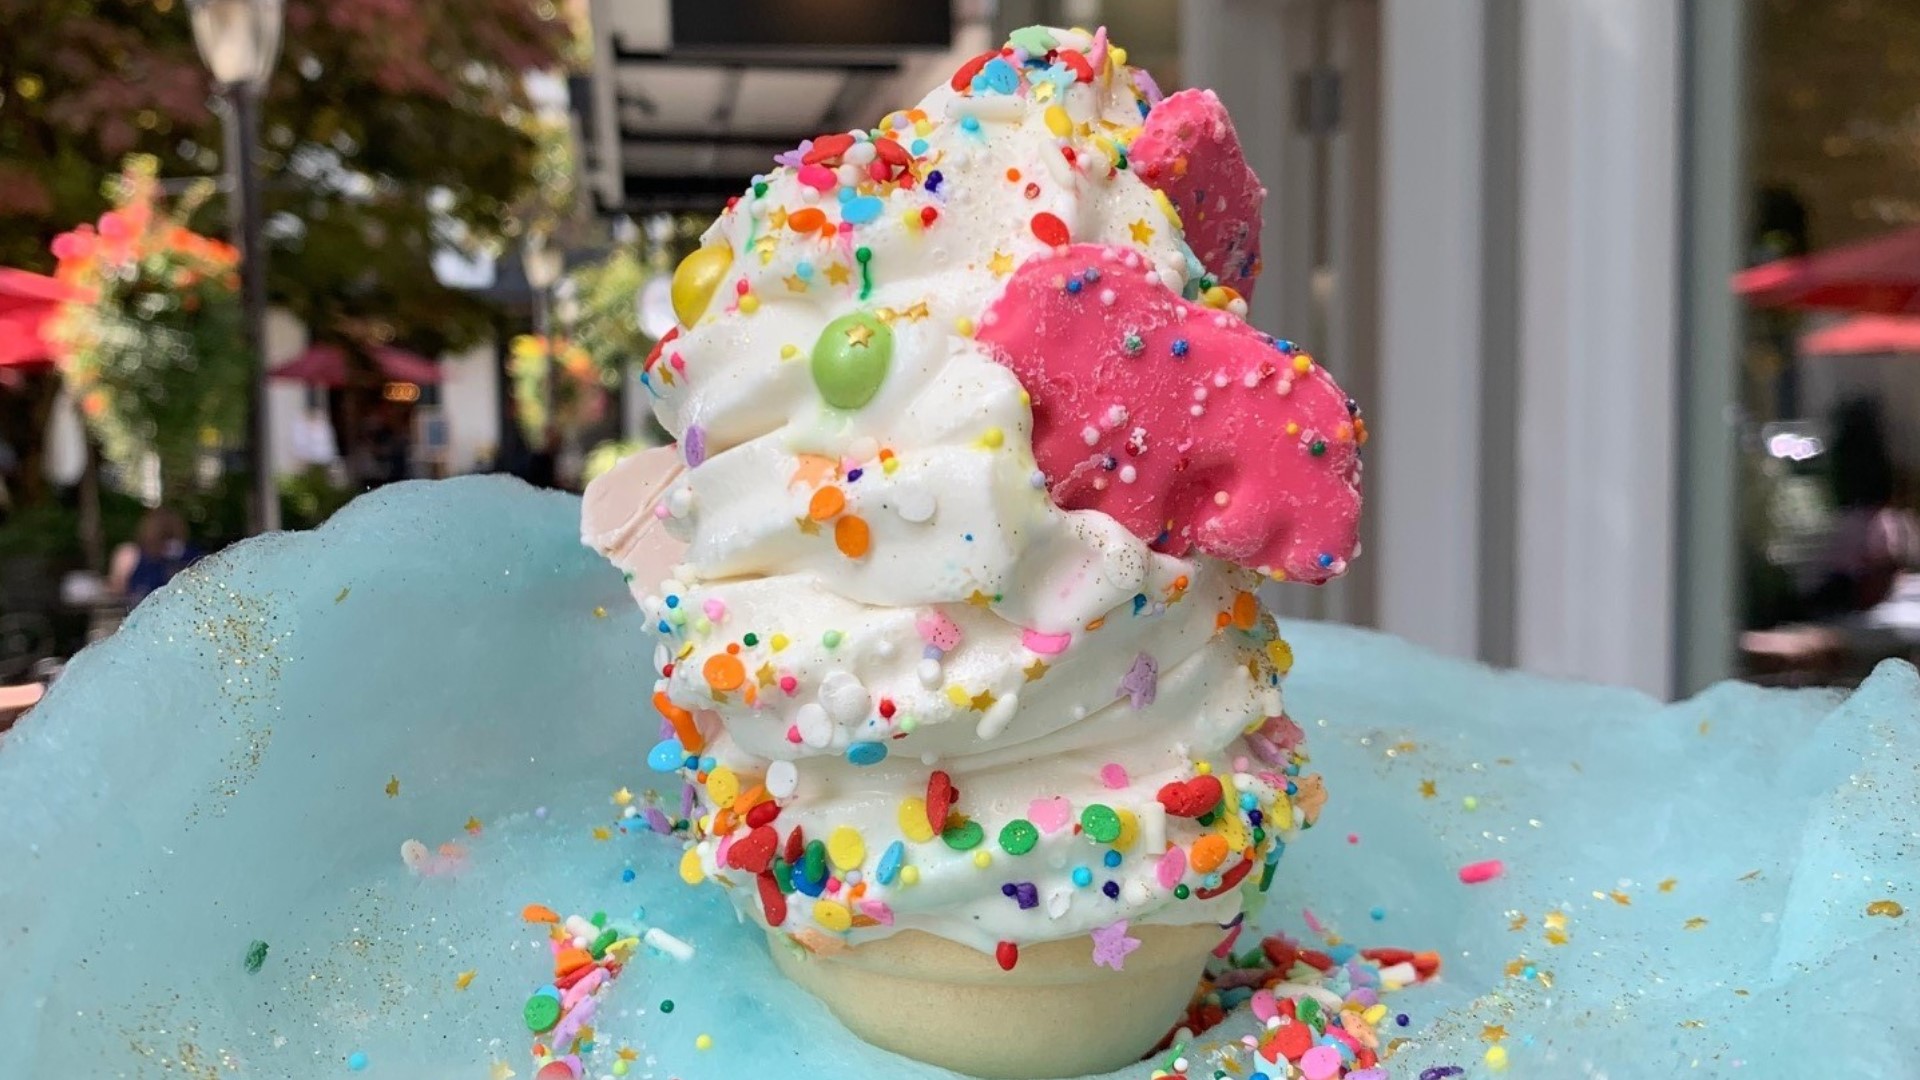 Trophy Cupcakes at University Village can create the soft serve of your dreams!